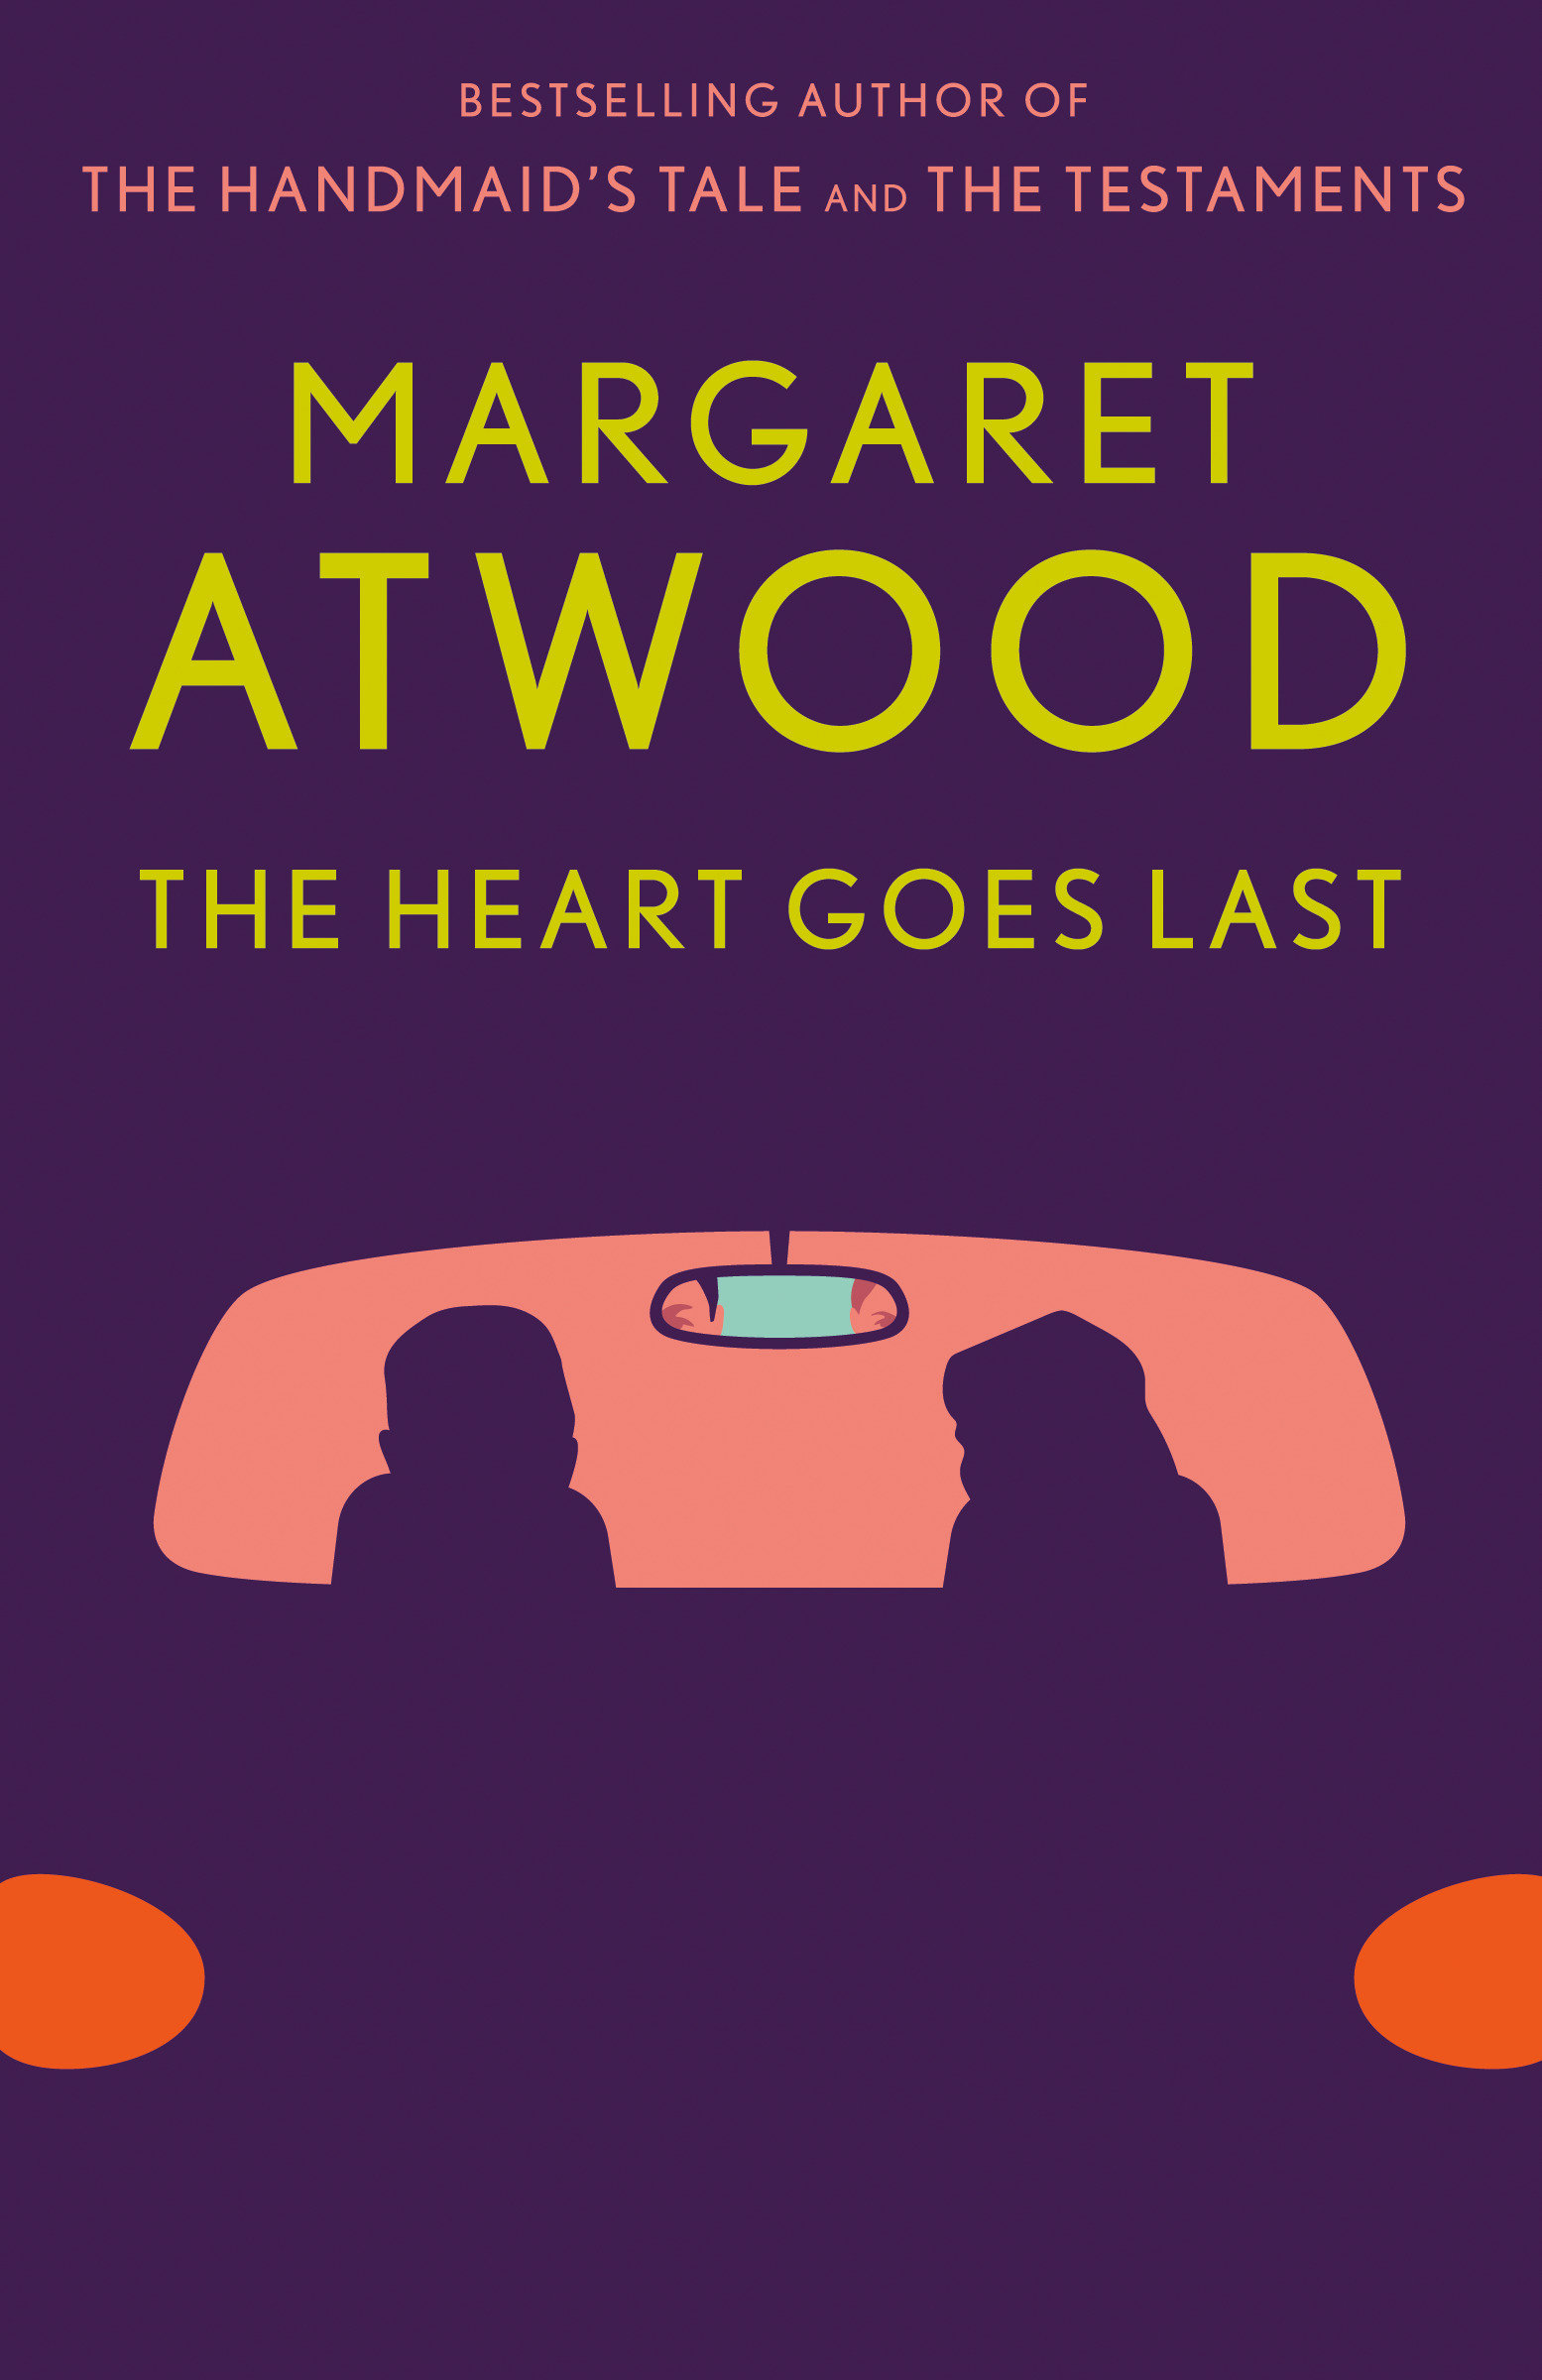 The heart goes last cover image